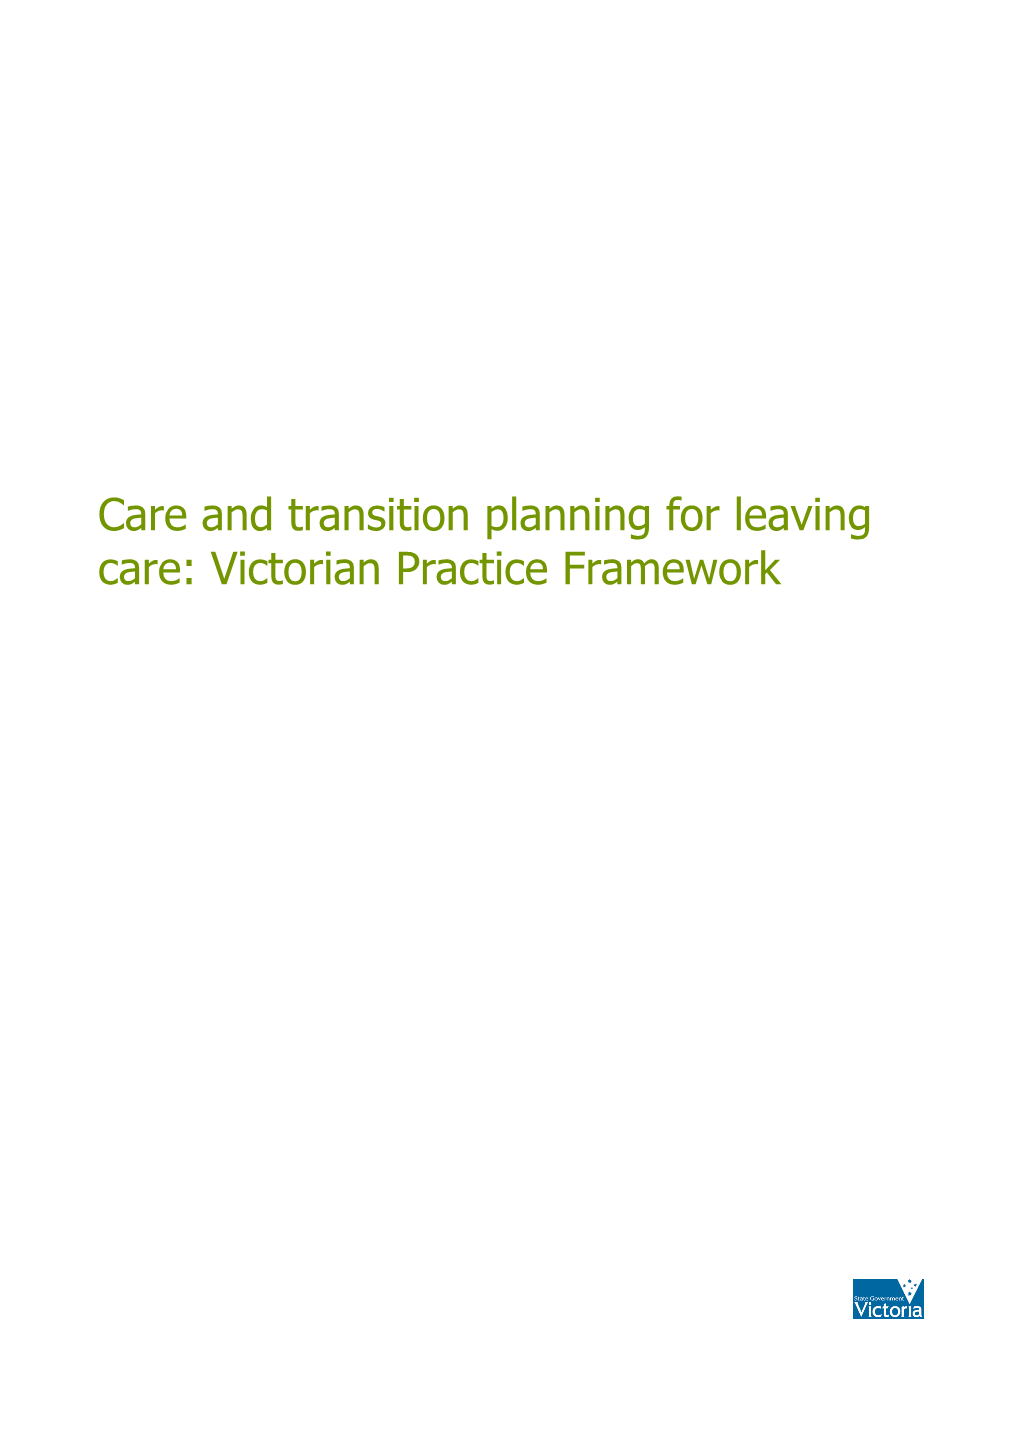 Care and Transition Planning for Leaving Care: Victorian Practice Framework